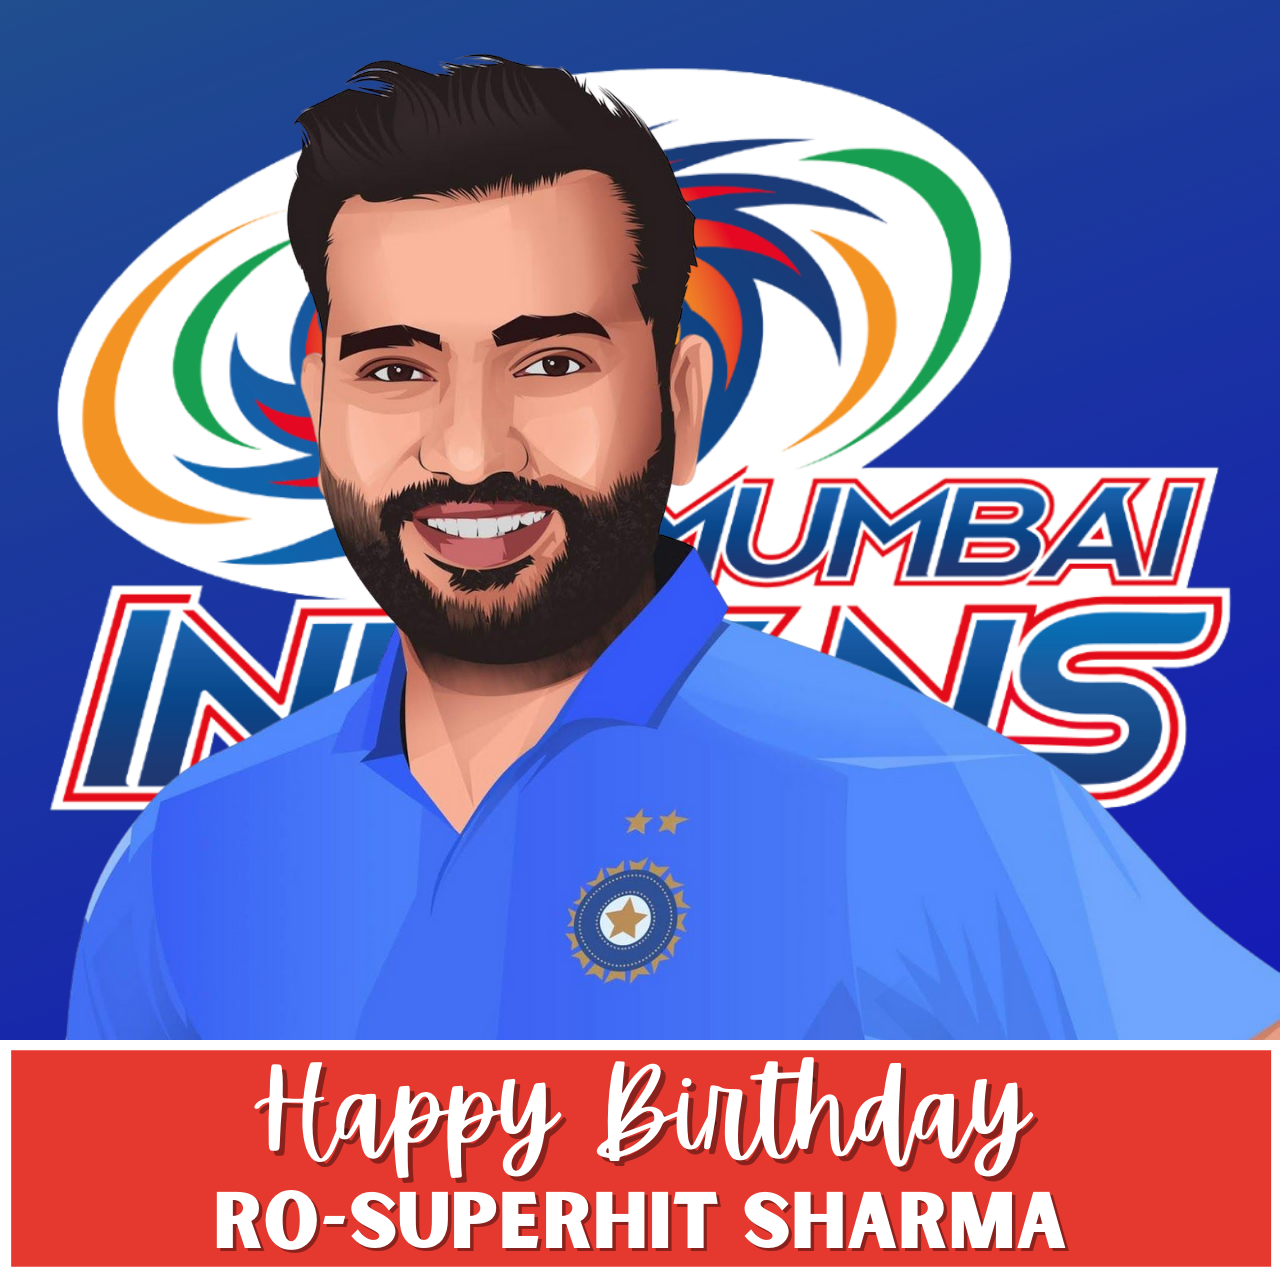 Happy Birthday Rohit Sharma HD Images (Photo), Status, Poster, and wishes to share with Ro-Super-Hit-Sharma